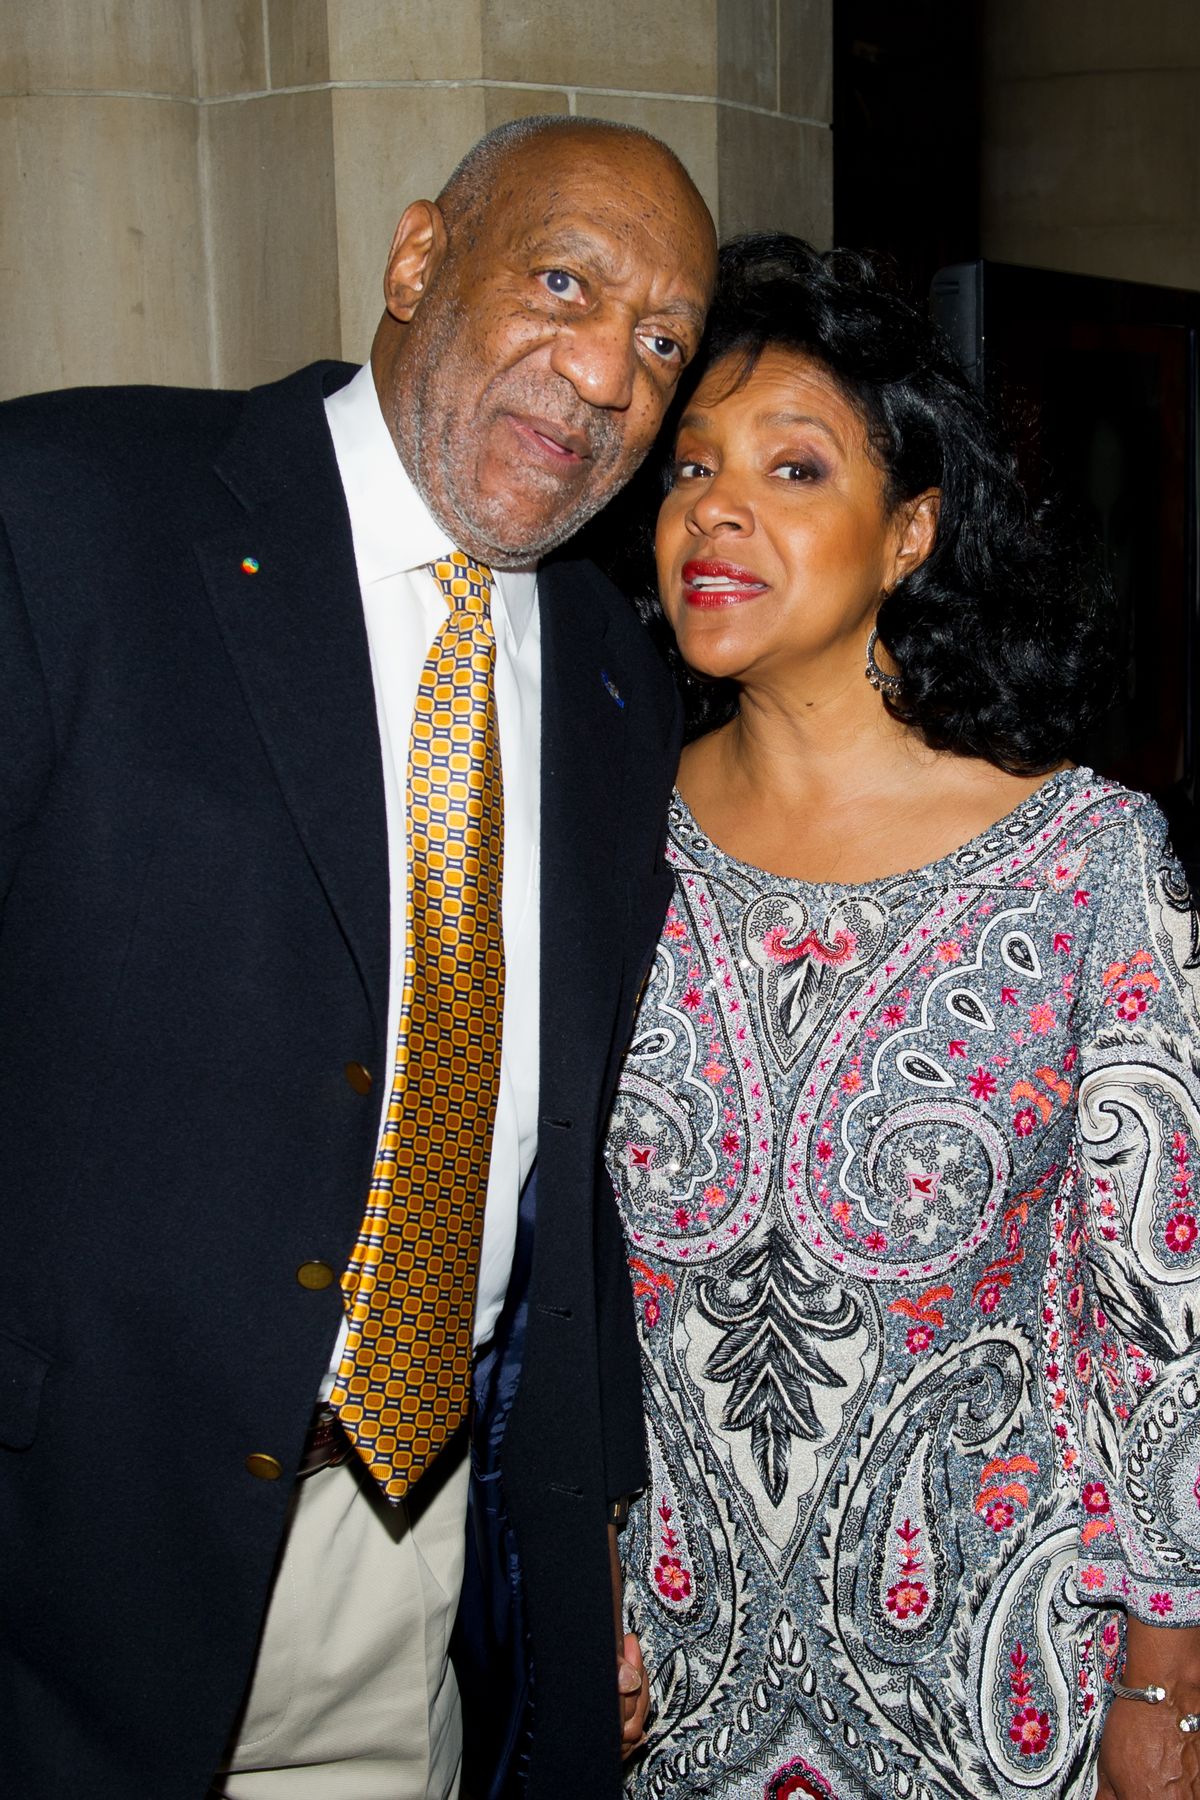 NEW YORK, NY - SEPTEMBER 26:  Comedian Bill Cosby (L) and actress Phylicia Rashad attend the 2nd annual Legacy to Promise Gala at The Riverside Theatre on September 26, 2011 in New York City.  (Photo by Michael Stewart/WireImage) (Michael Stewart/WireImage)